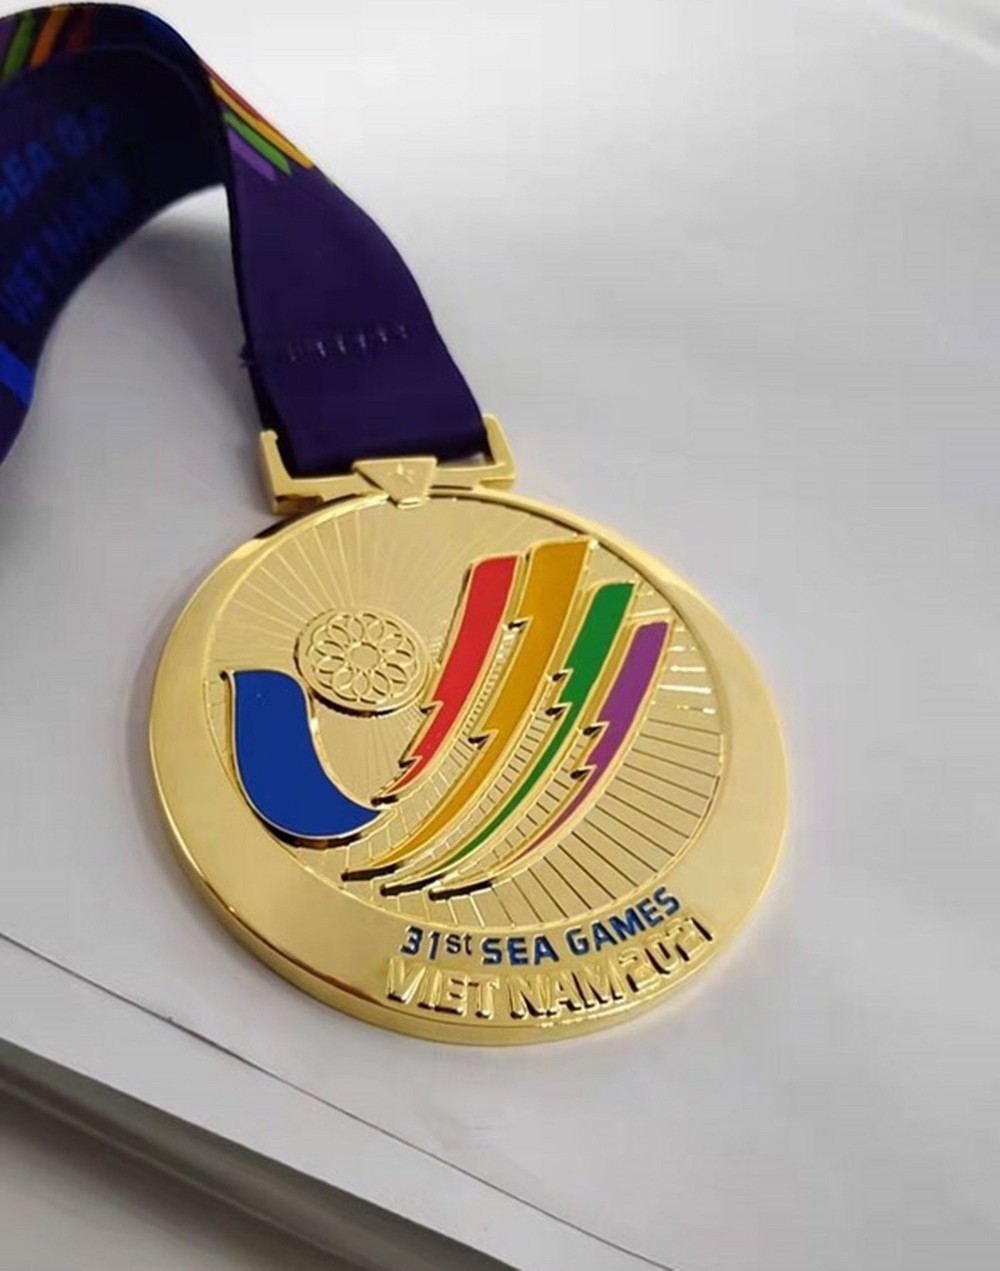 The medal set for the 31st SEA Games was officially released - Photo 2.